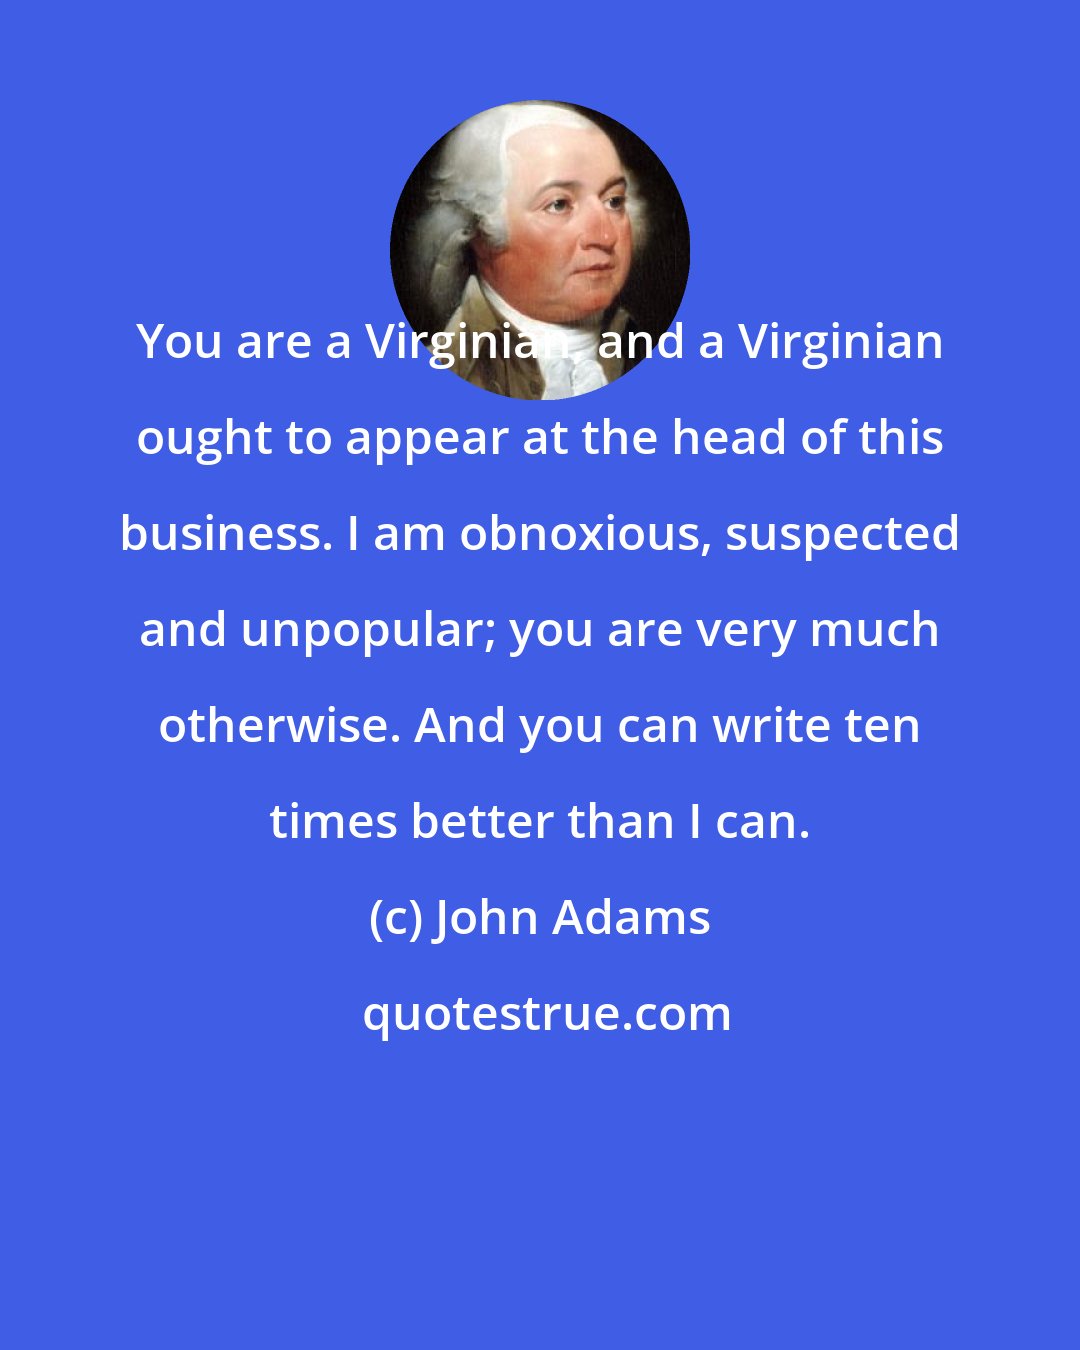 John Adams: You are a Virginian, and a Virginian ought to appear at the head of this business. I am obnoxious, suspected and unpopular; you are very much otherwise. And you can write ten times better than I can.